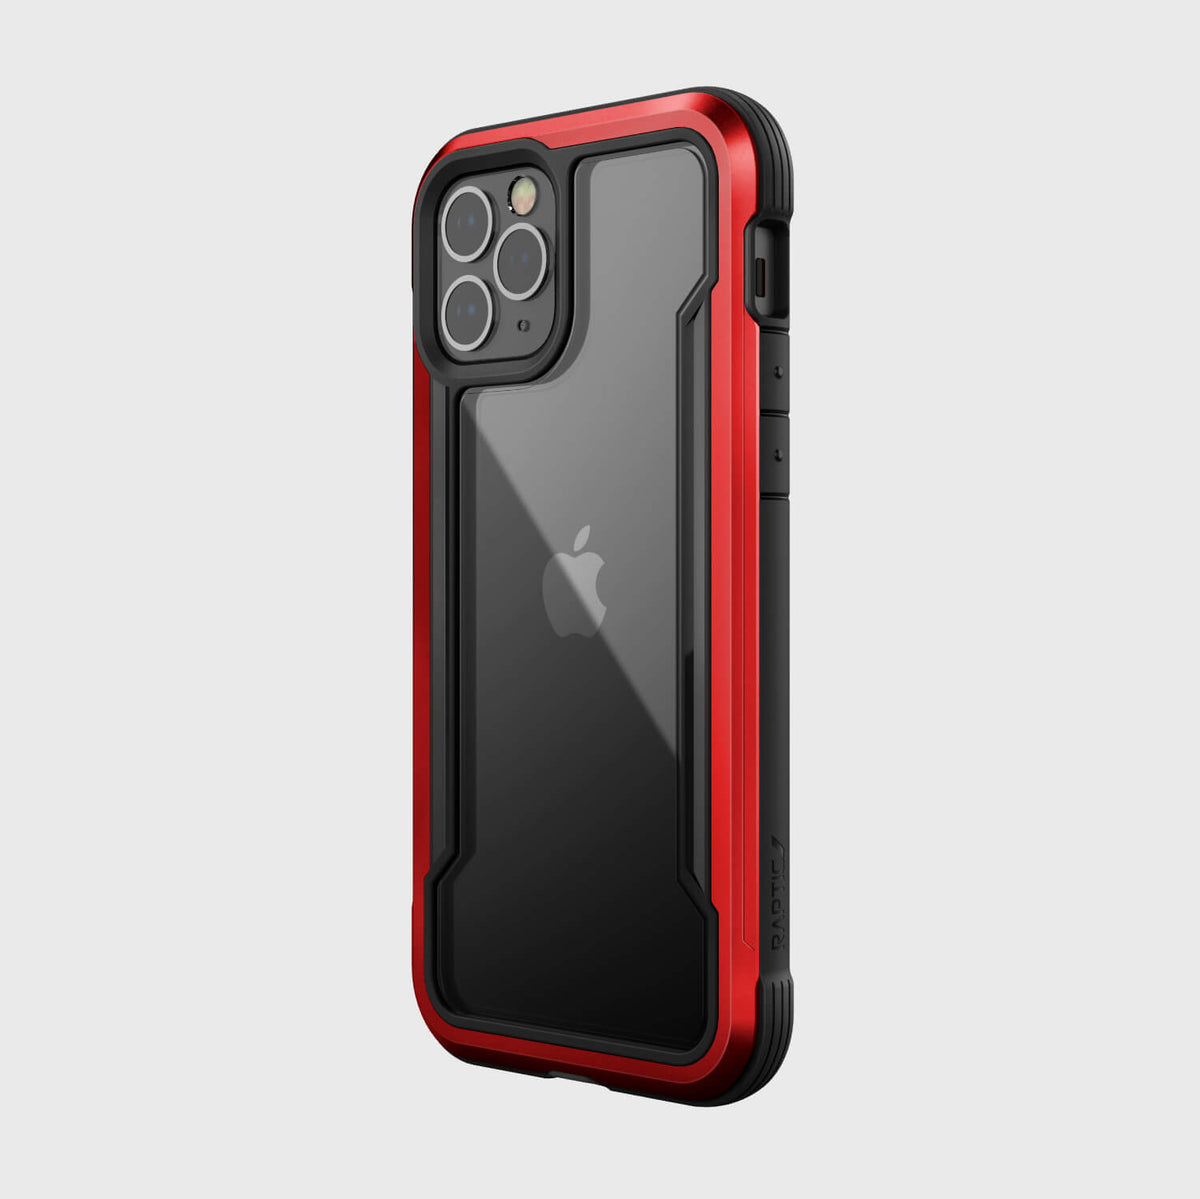 The SHIELD iPhone 12 Pro Max case is red and black, offering foot drop protection with the Raptic Shield case.